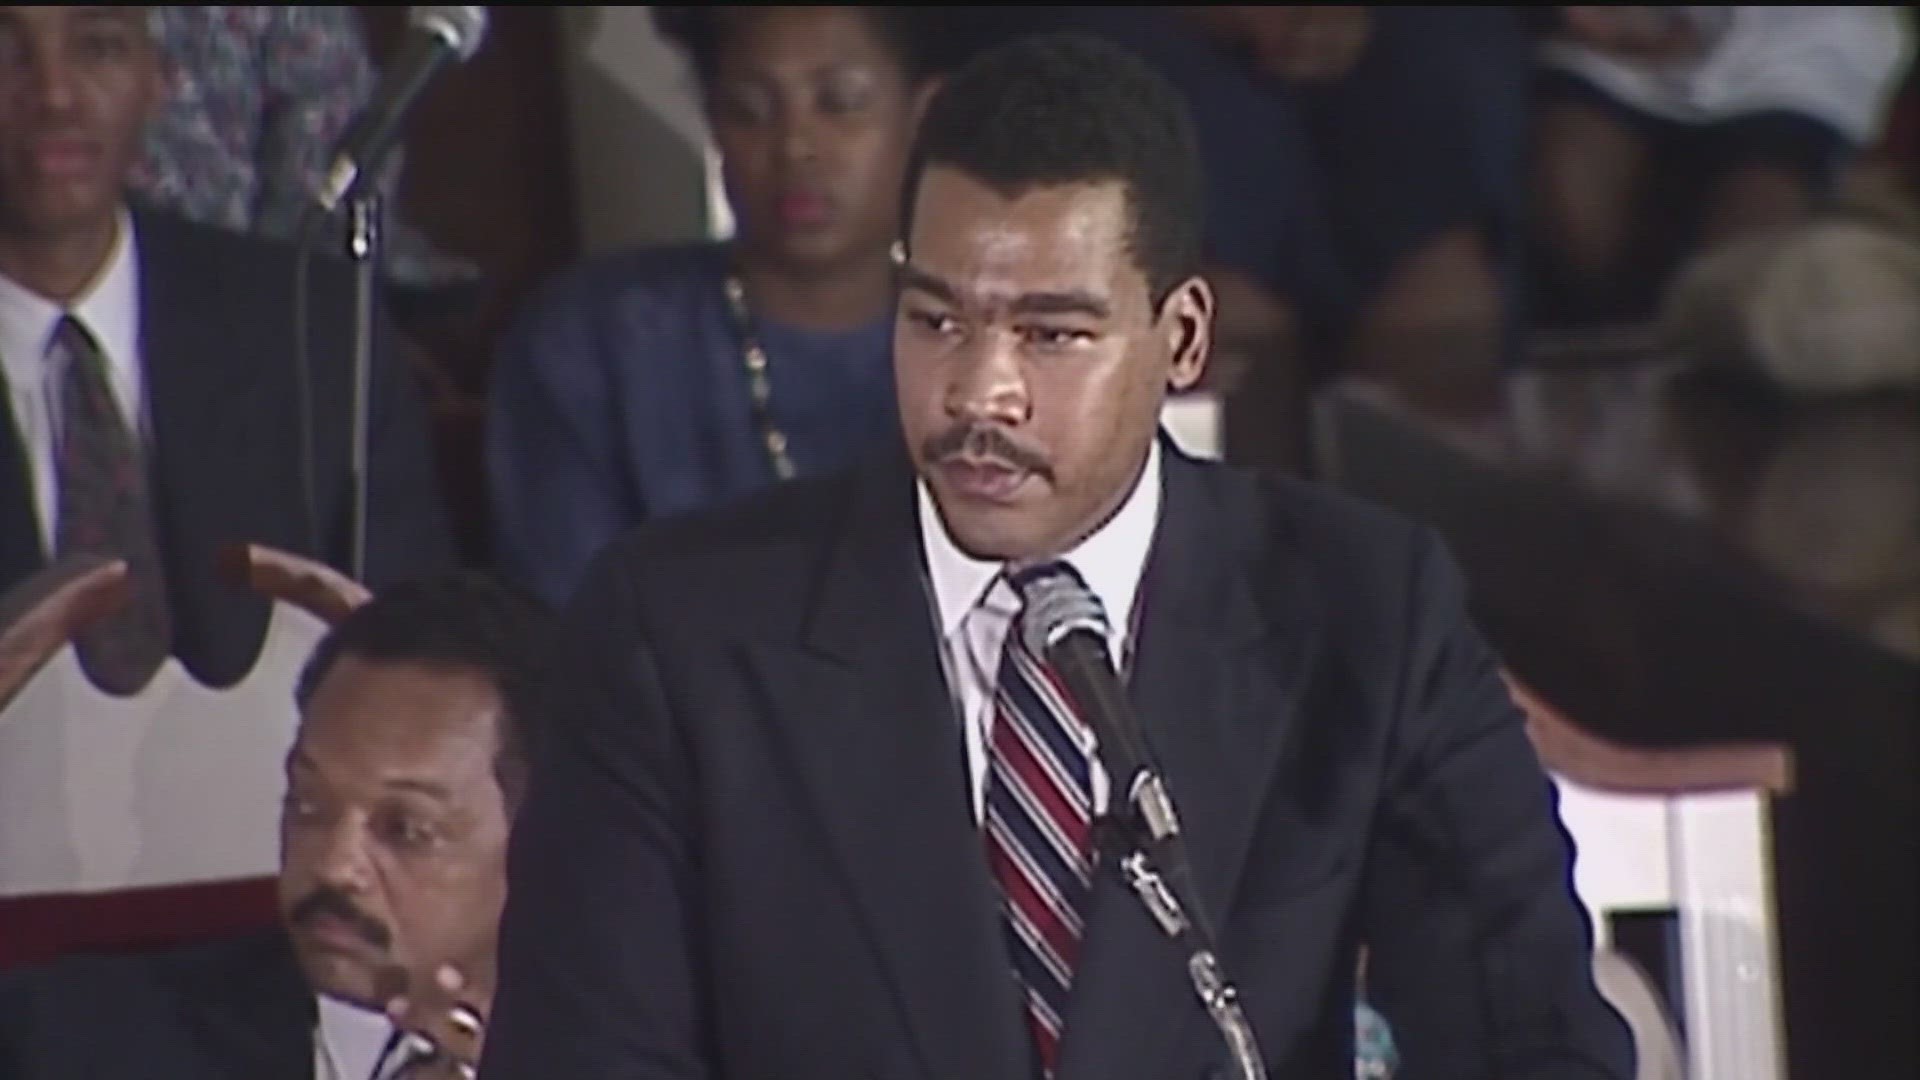 Dexter Scott King, the youngest son of Martin Luther King, Jr. and Coretta Scott King, died last week at 62 years old.